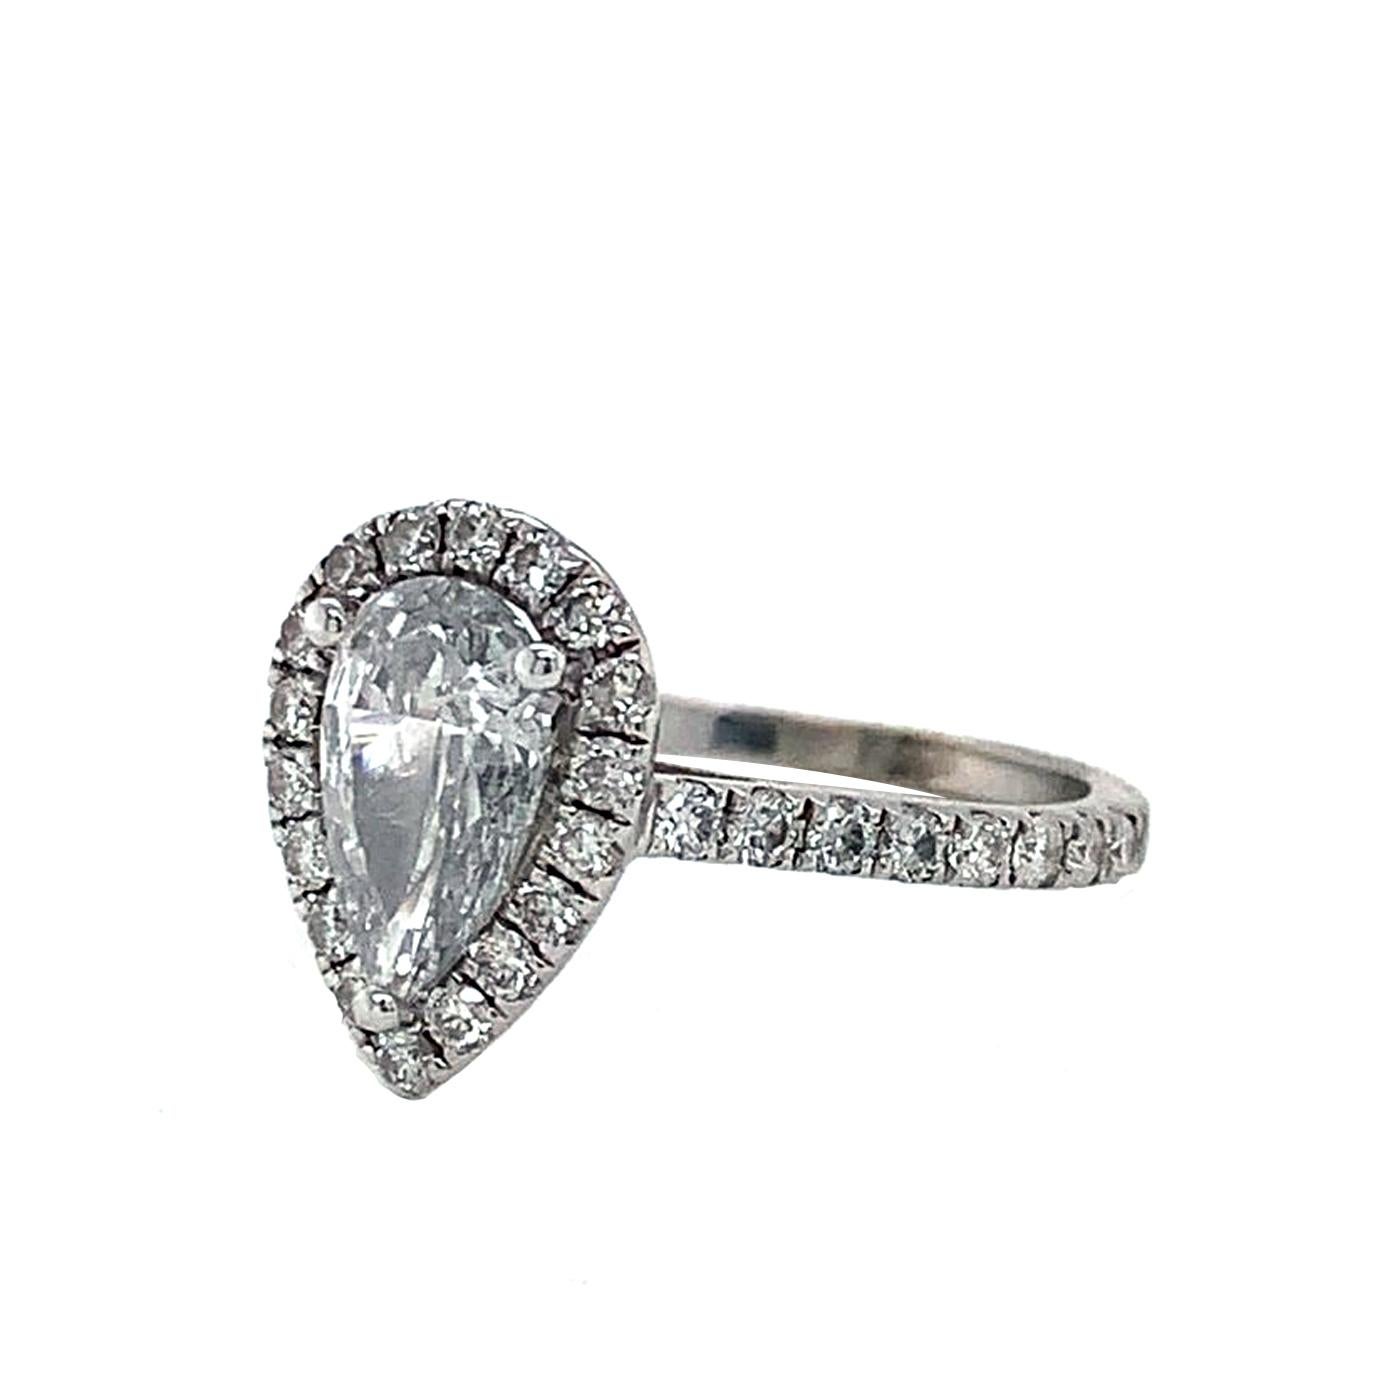 Created in platinum, this mesmerizing diamond engagement ring showcases a 0.91ct pear-shaped center diamond, GIA certified. It is accented by a shimmering halo of round brilliant cut diamonds as well as one row of sparkling diamonds micro pavé set